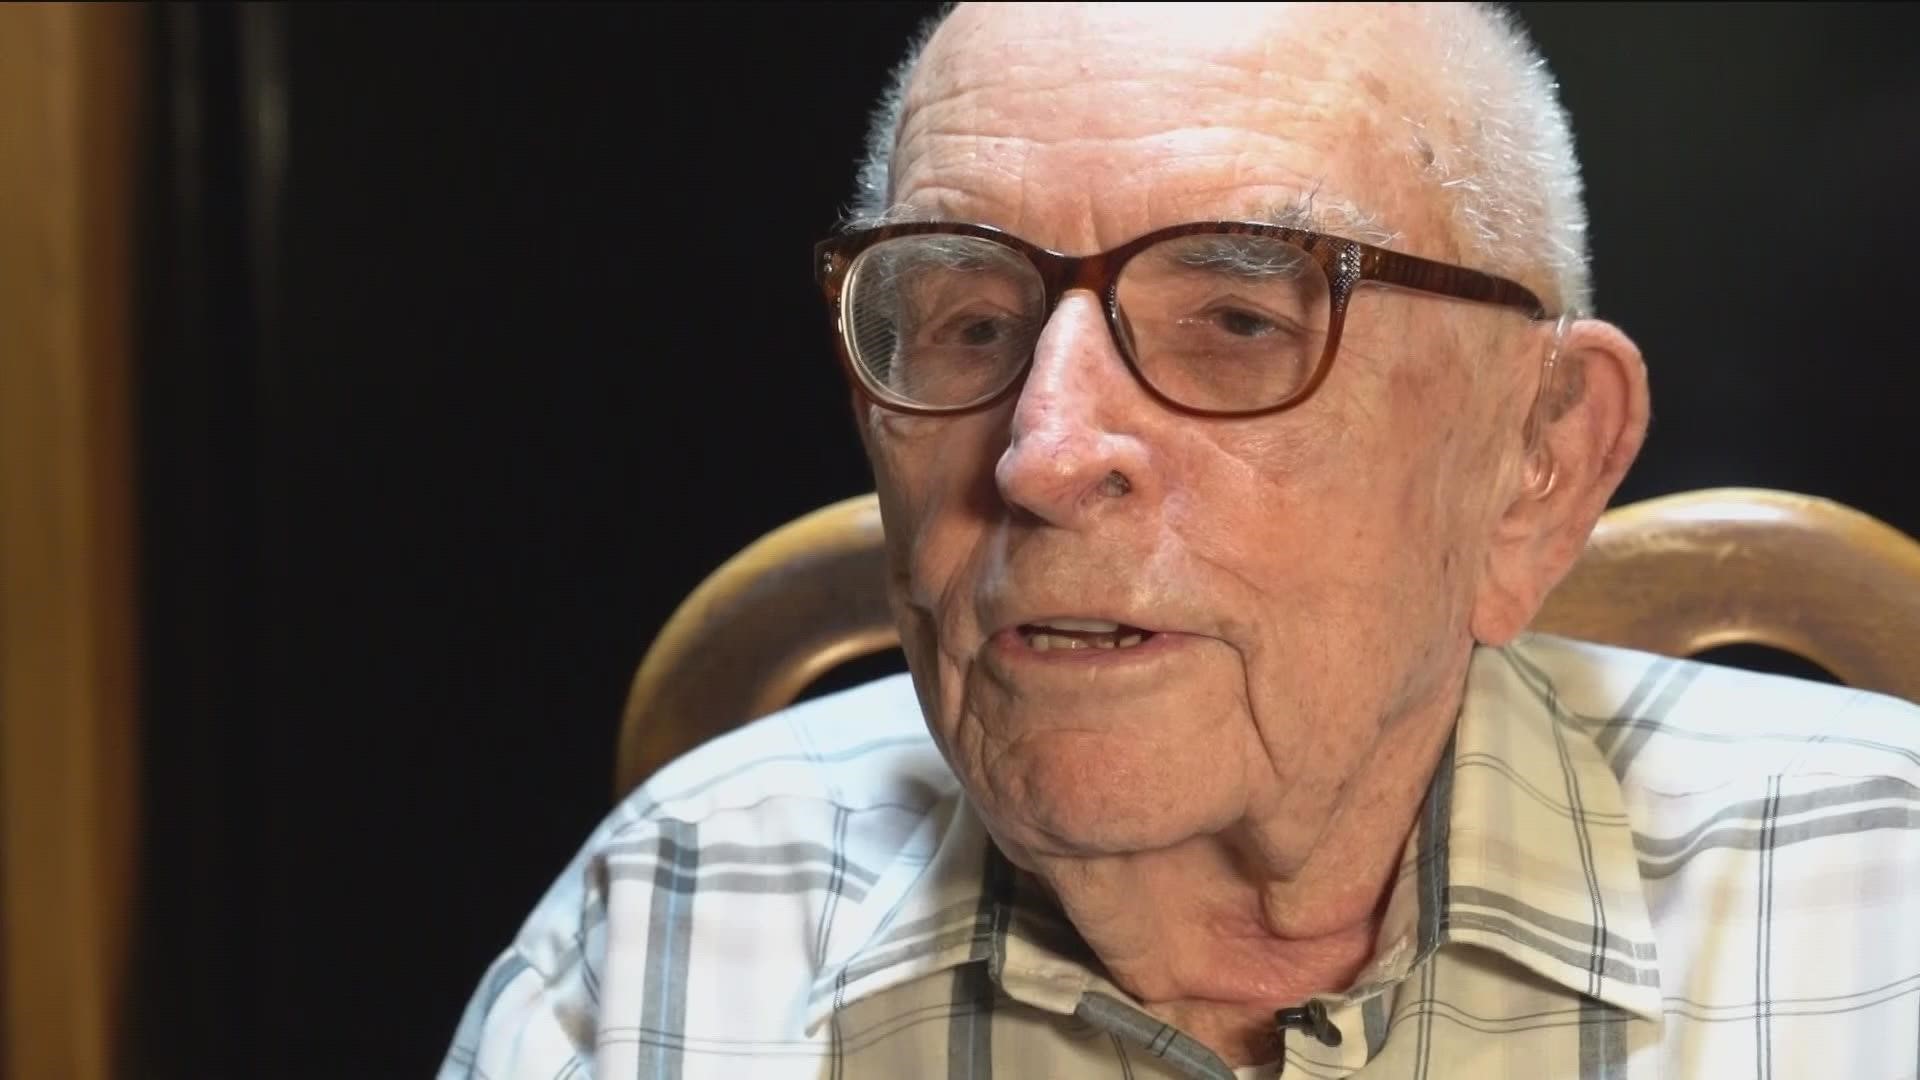 Archie Mocyzgemba served more than two decades in the military. He remembers what he saw when he arrived in Japan at the end of World War II.